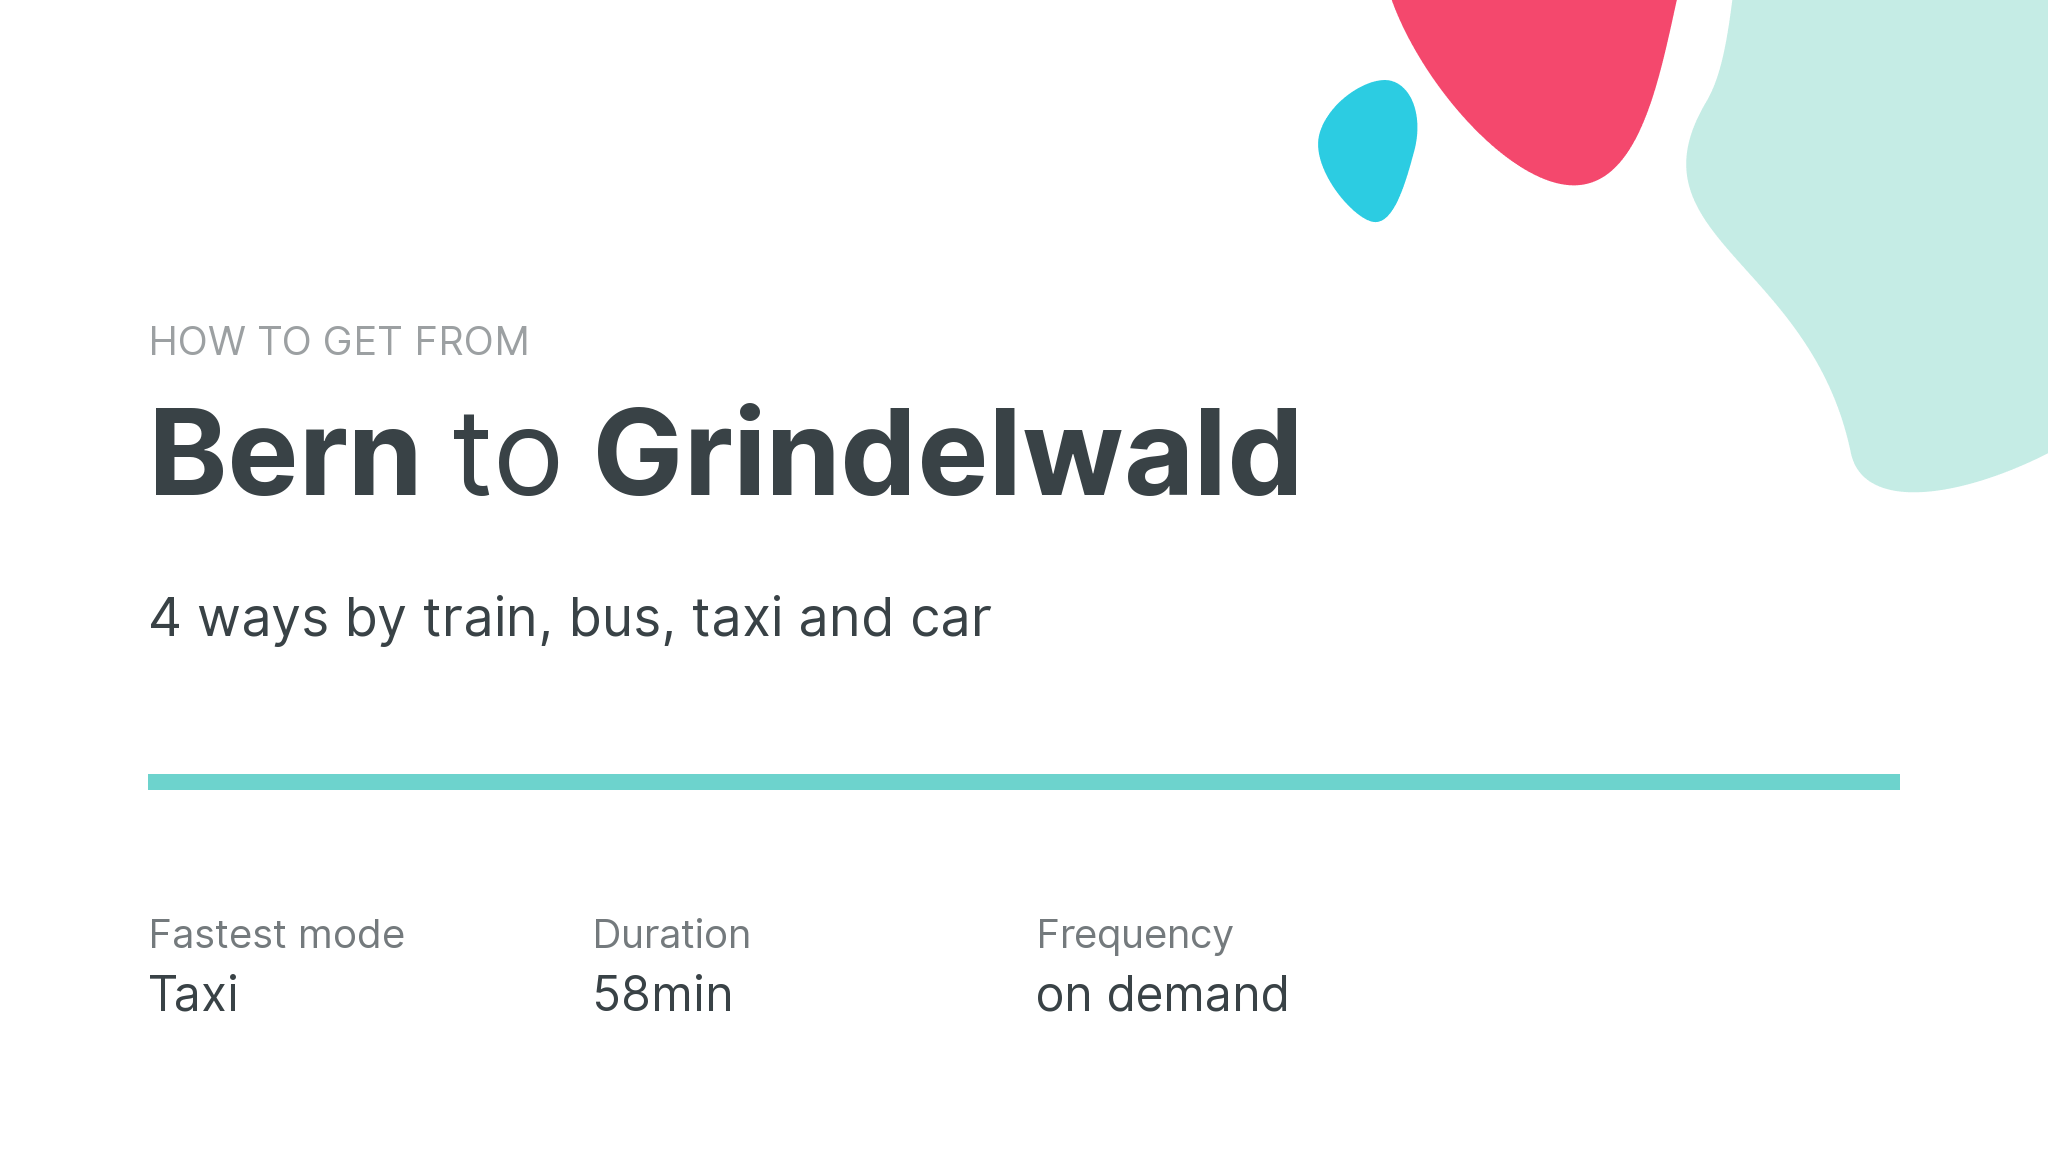 How do I get from Bern to Grindelwald